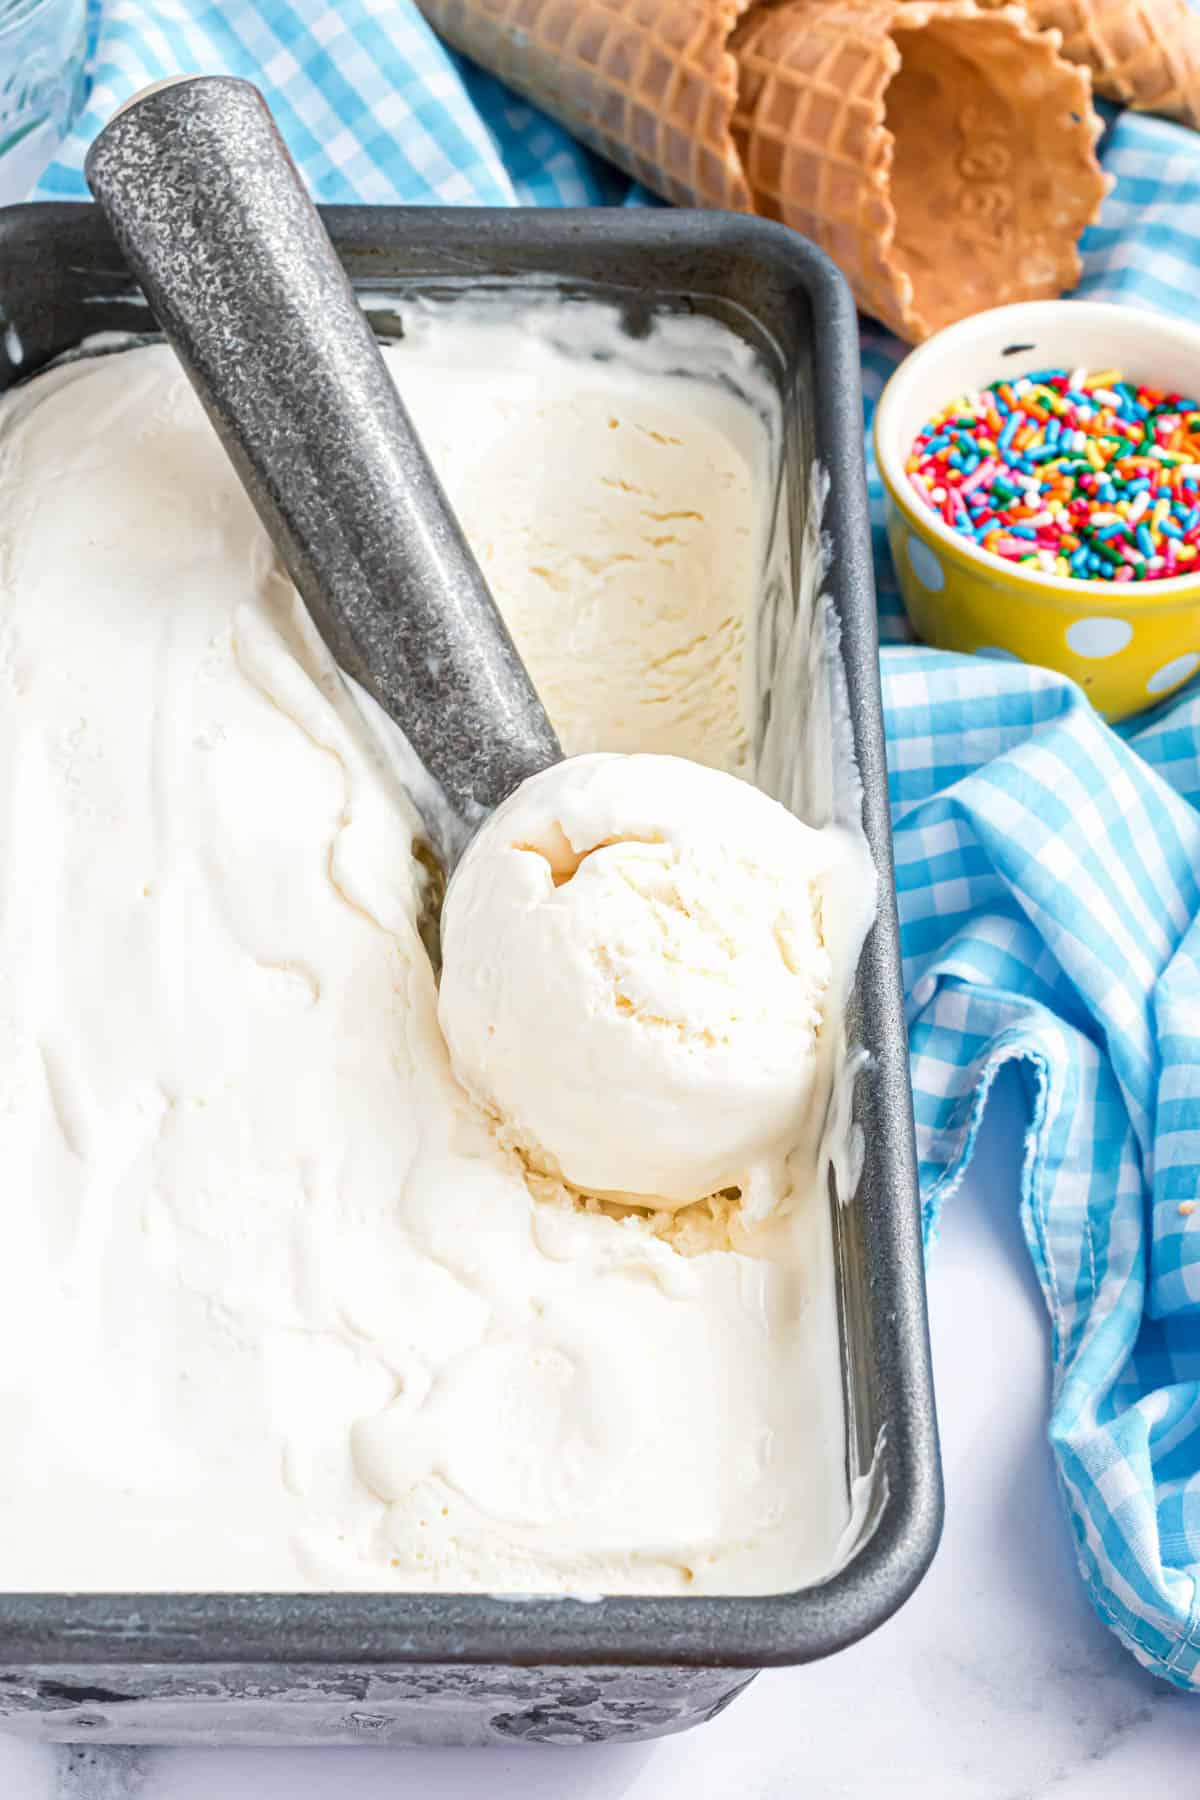 An ice cream scooper in a loaf pan filled with homemade no churn vanilla ice cream.